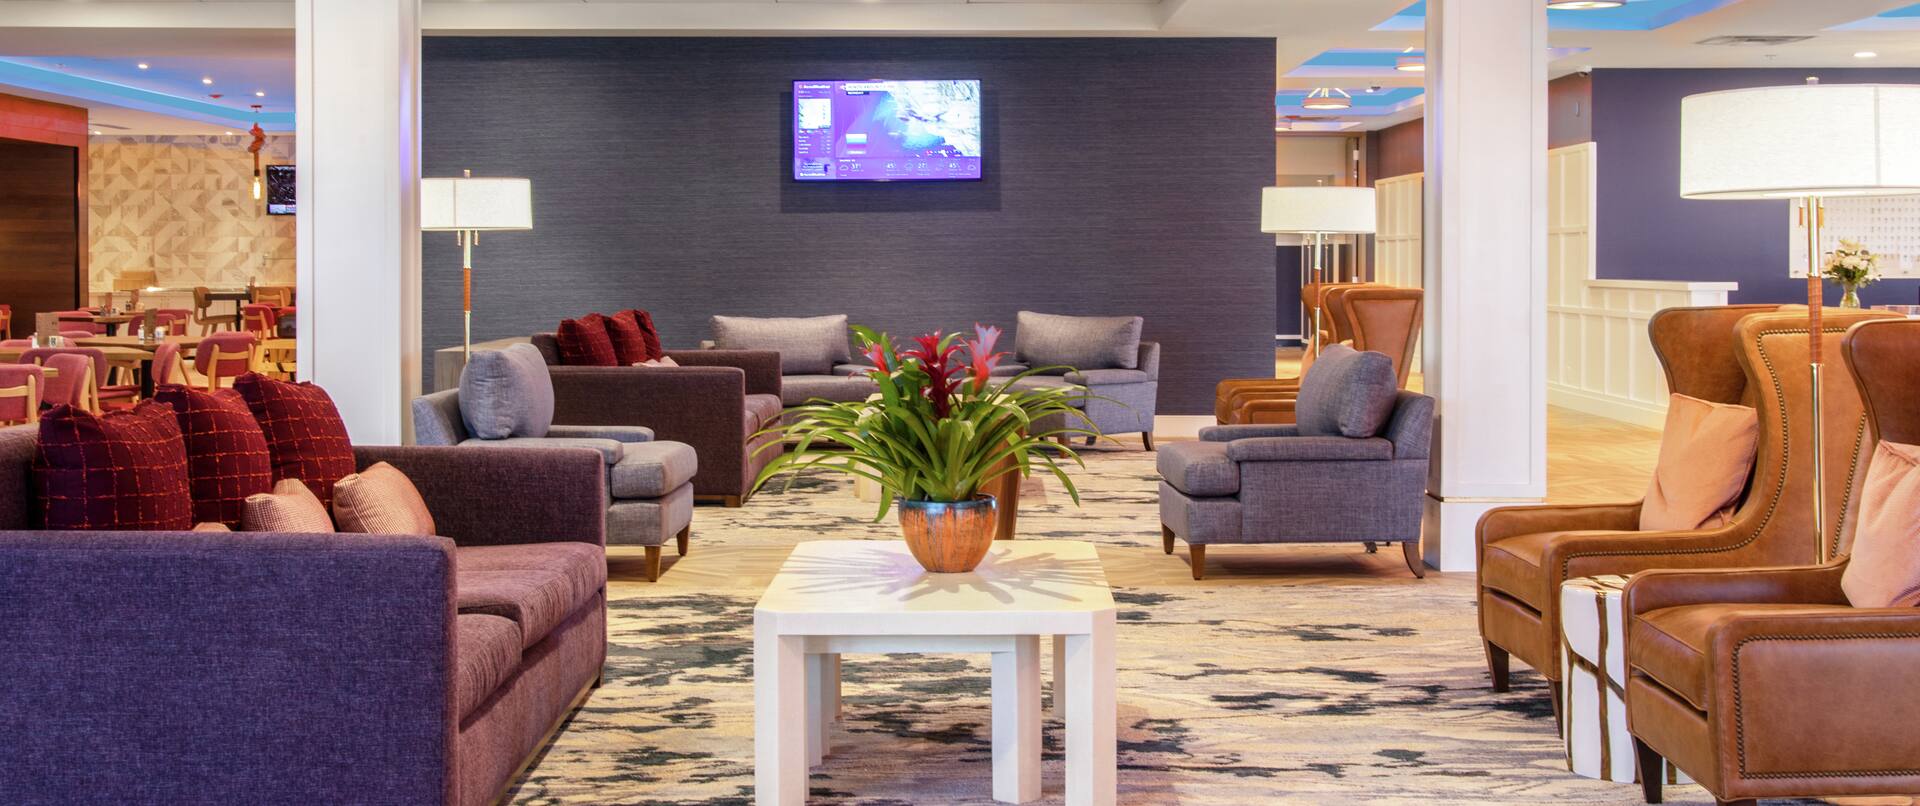 Lobby Area with Comfortable Seats and HDTV